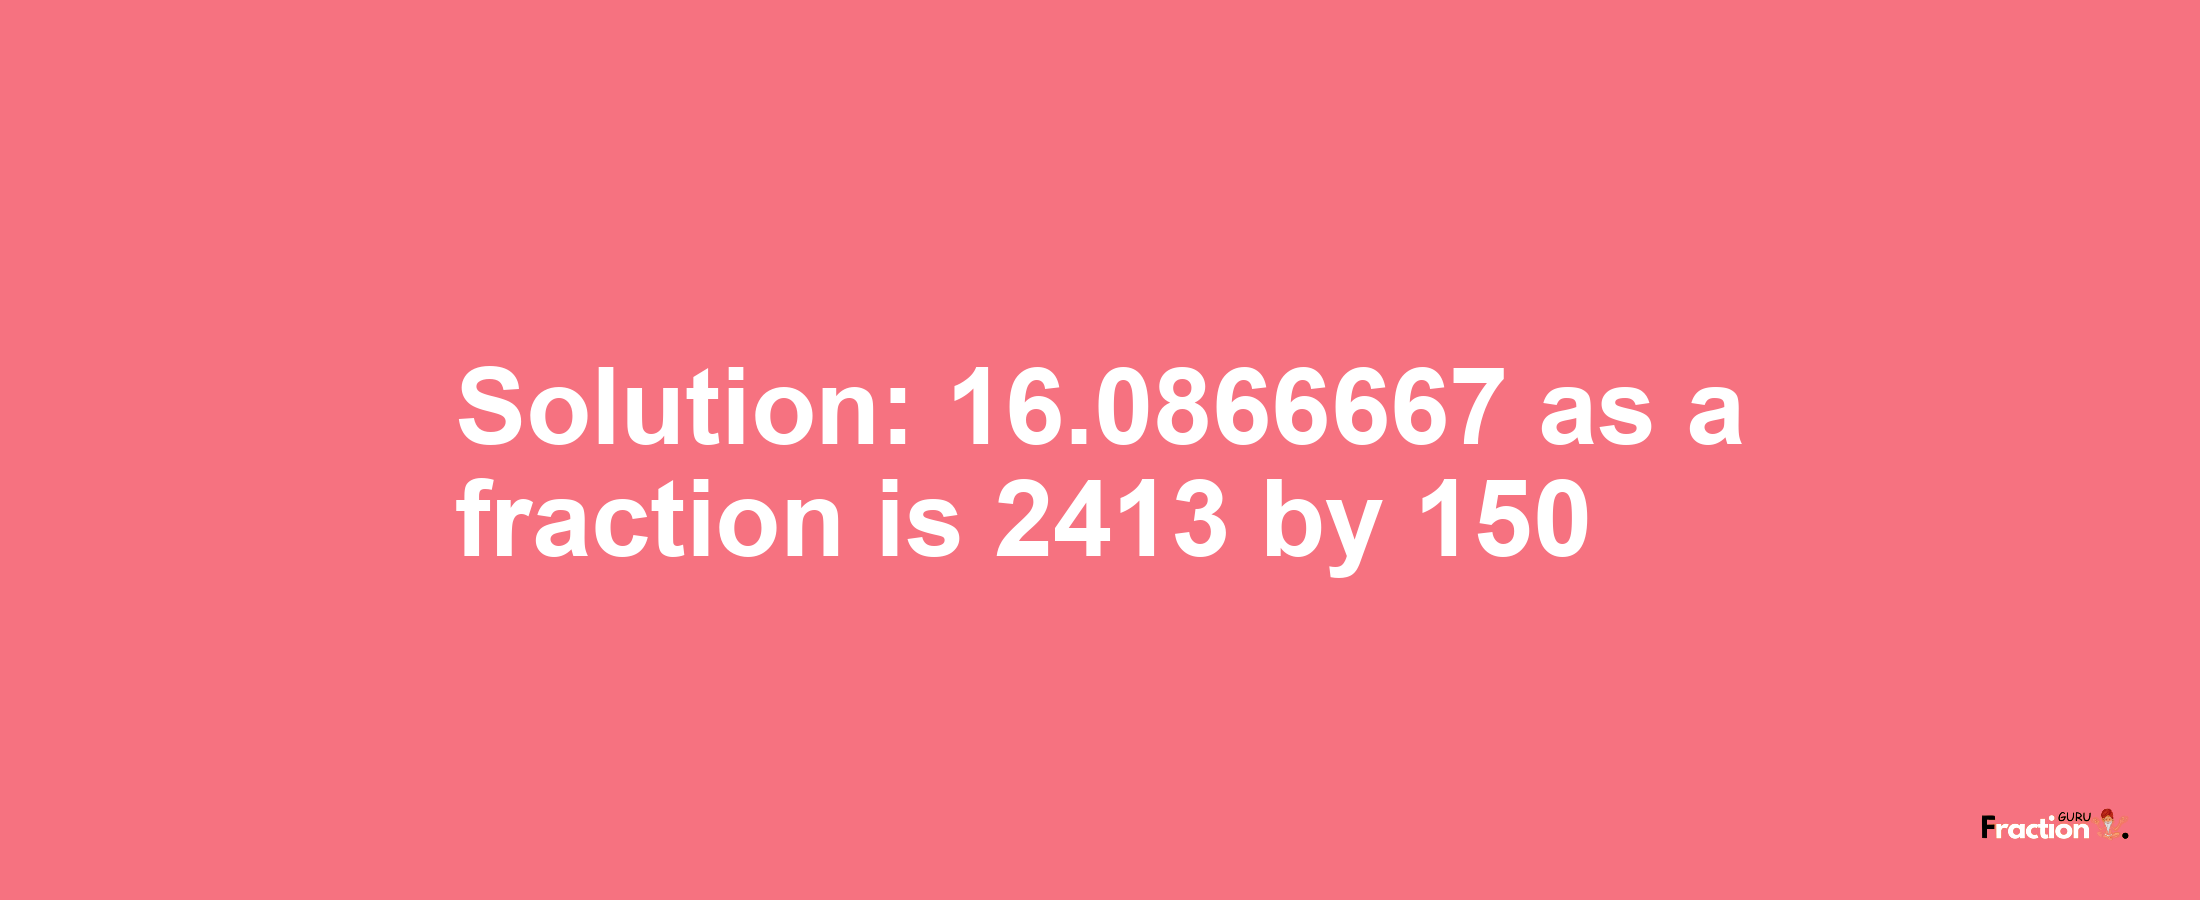 Solution:16.0866667 as a fraction is 2413/150